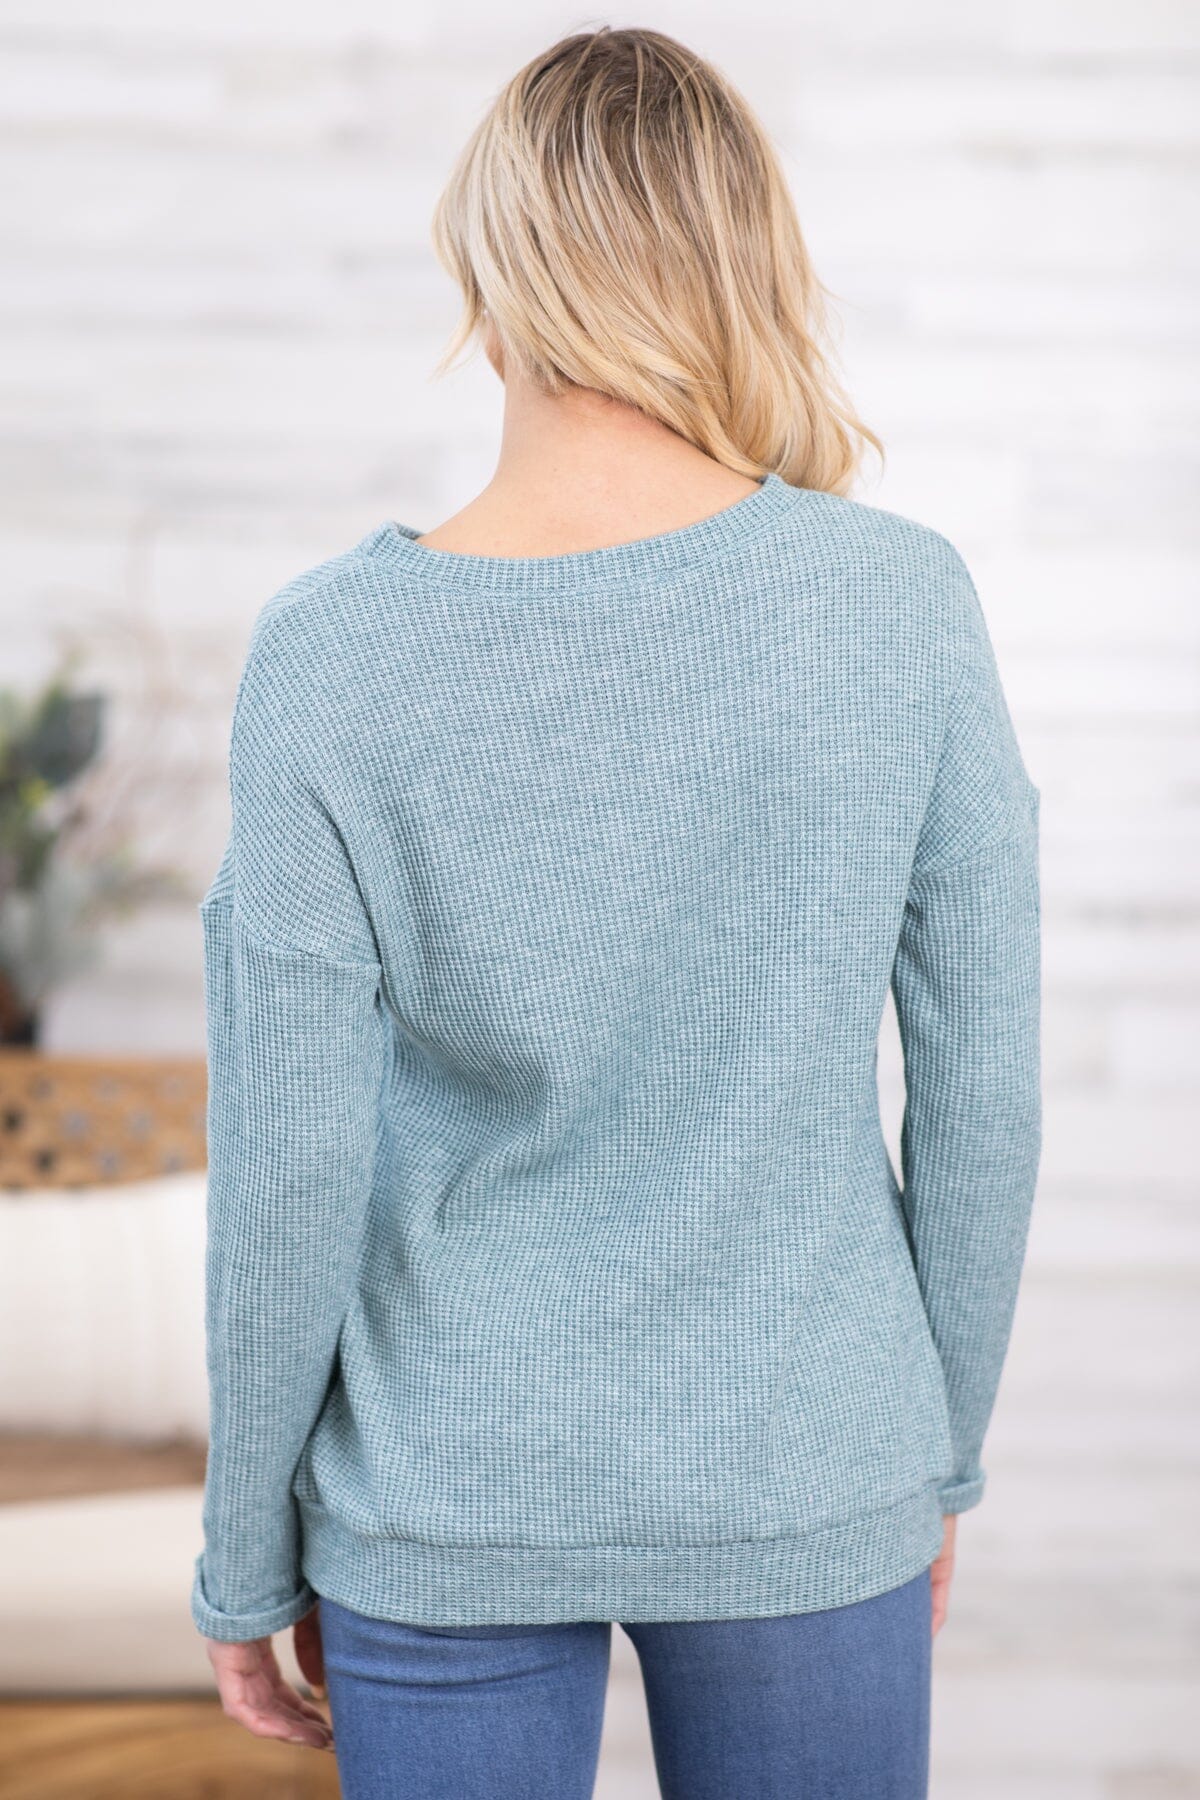 Teal Ribbed Drop Shoulder Top - Filly Flair